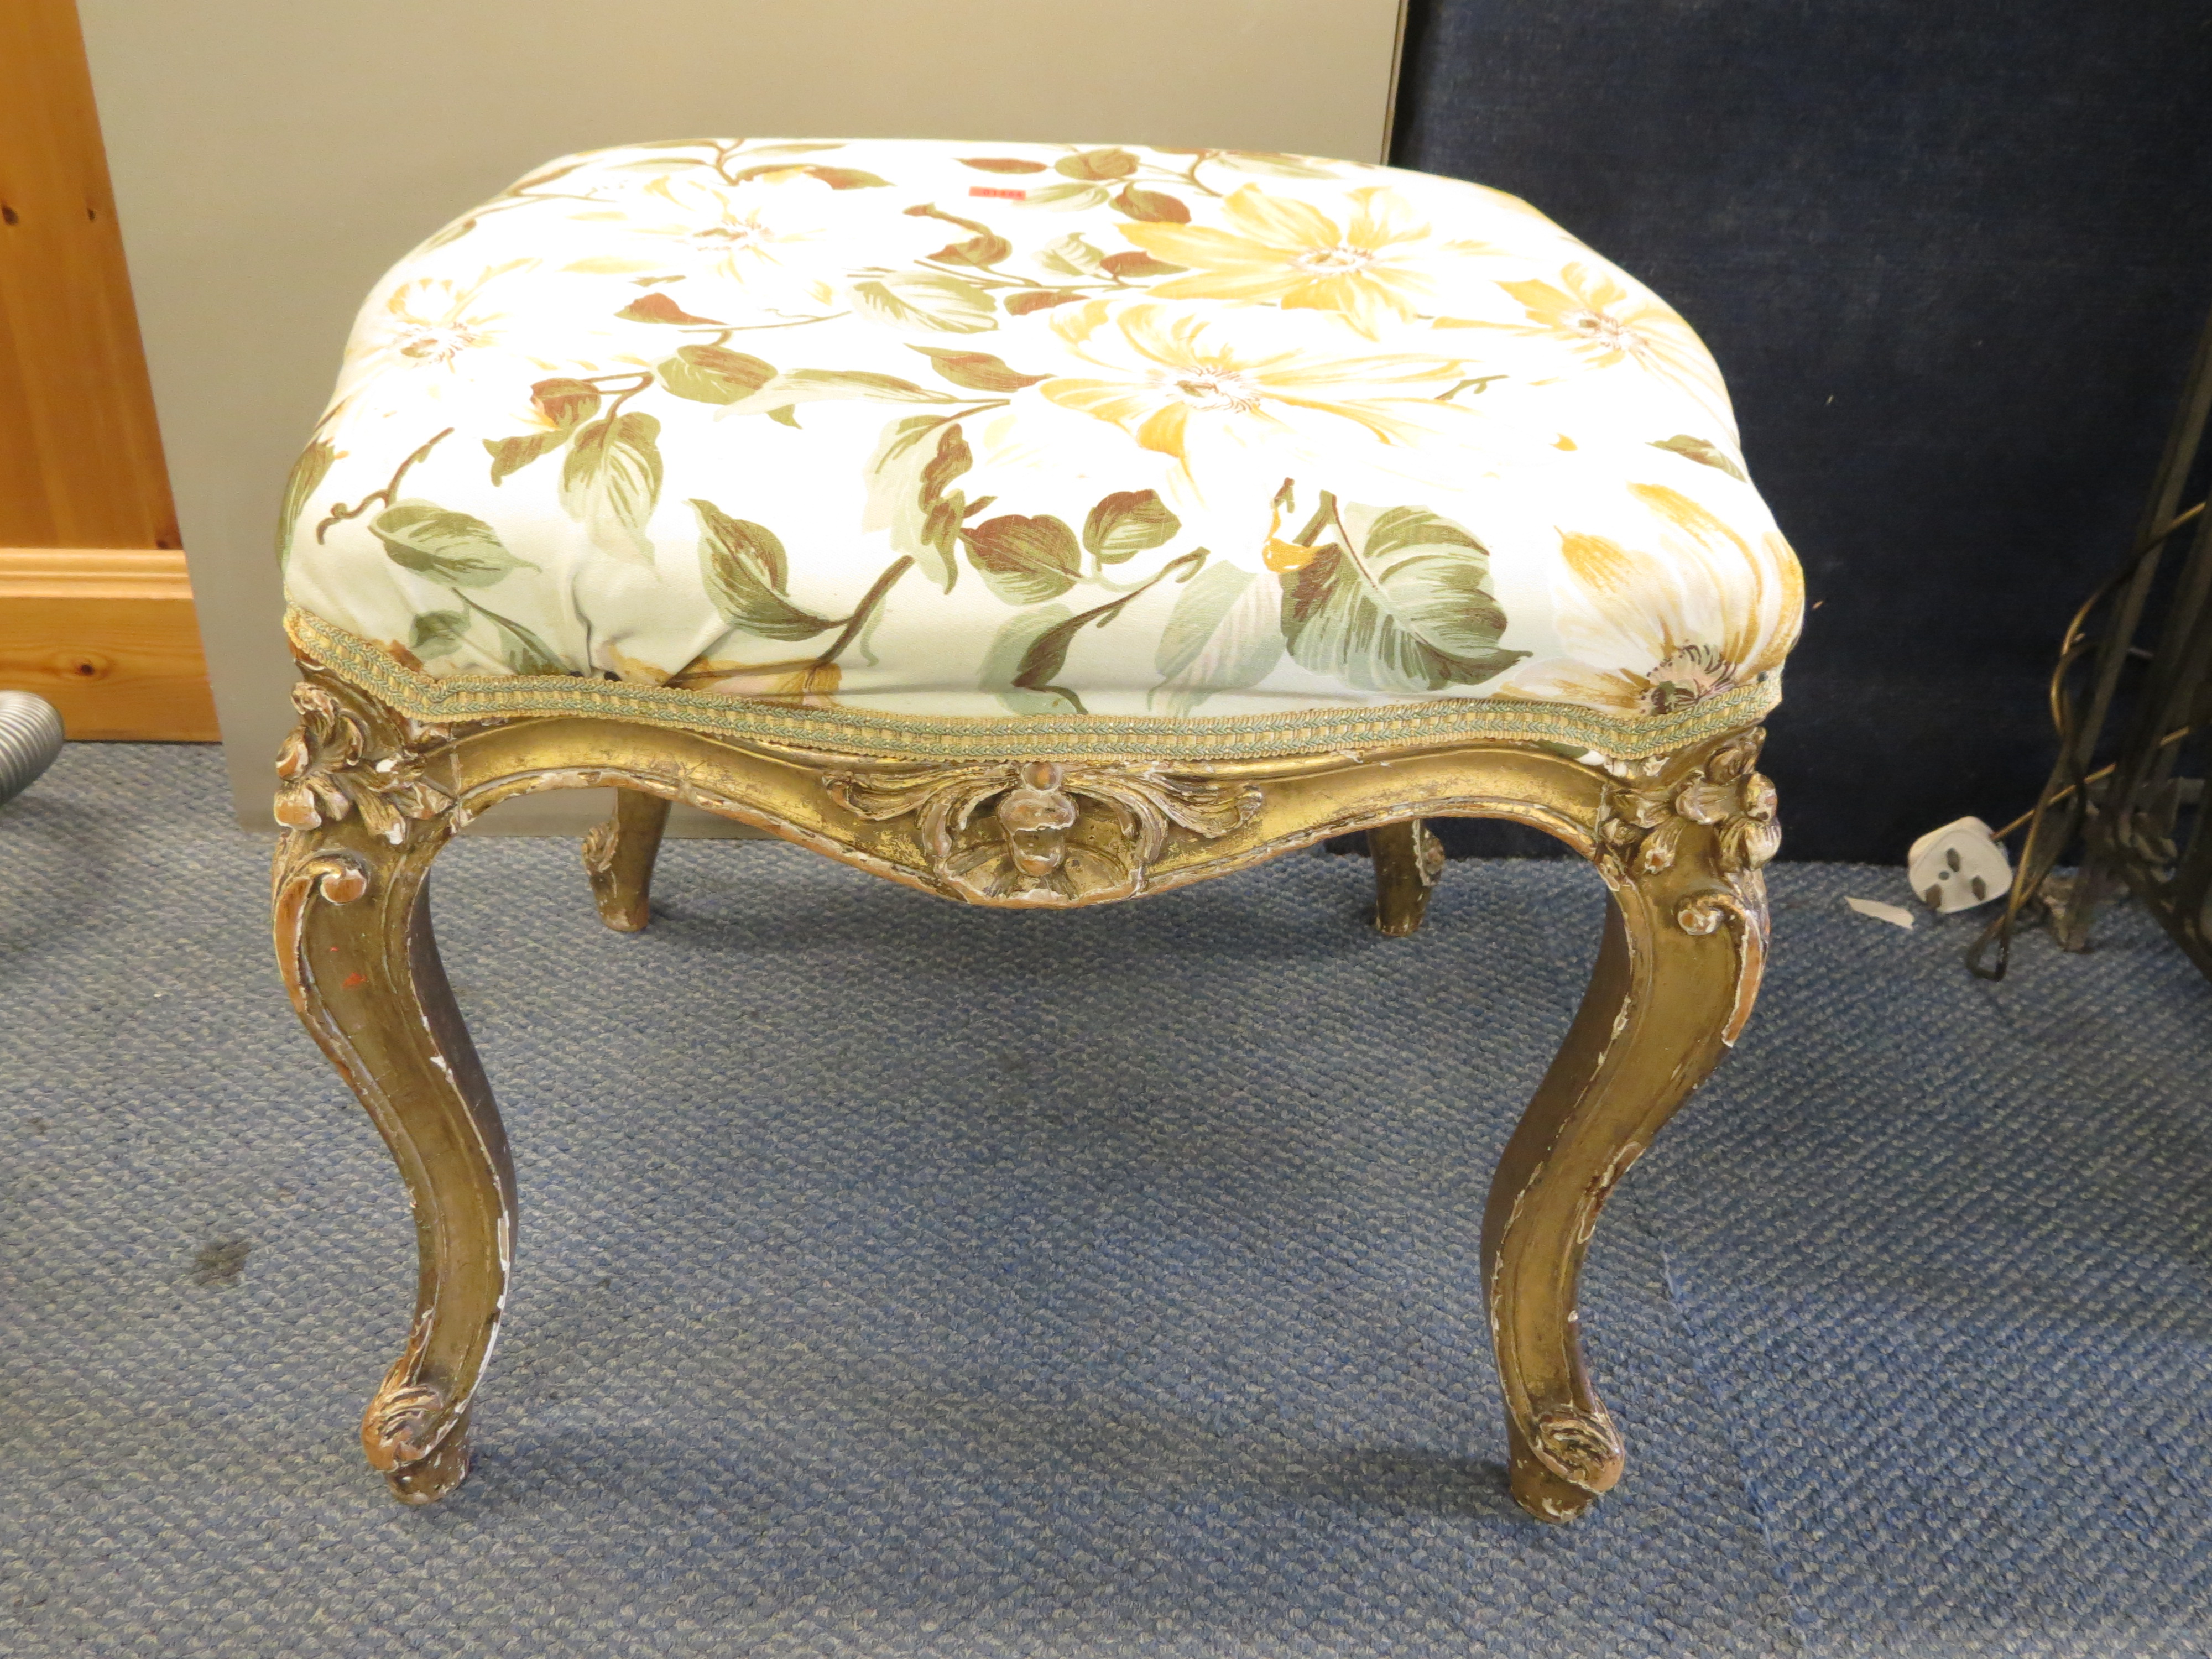 A 19th century French gilt wood stool having overstuffed seat on cabriole legs